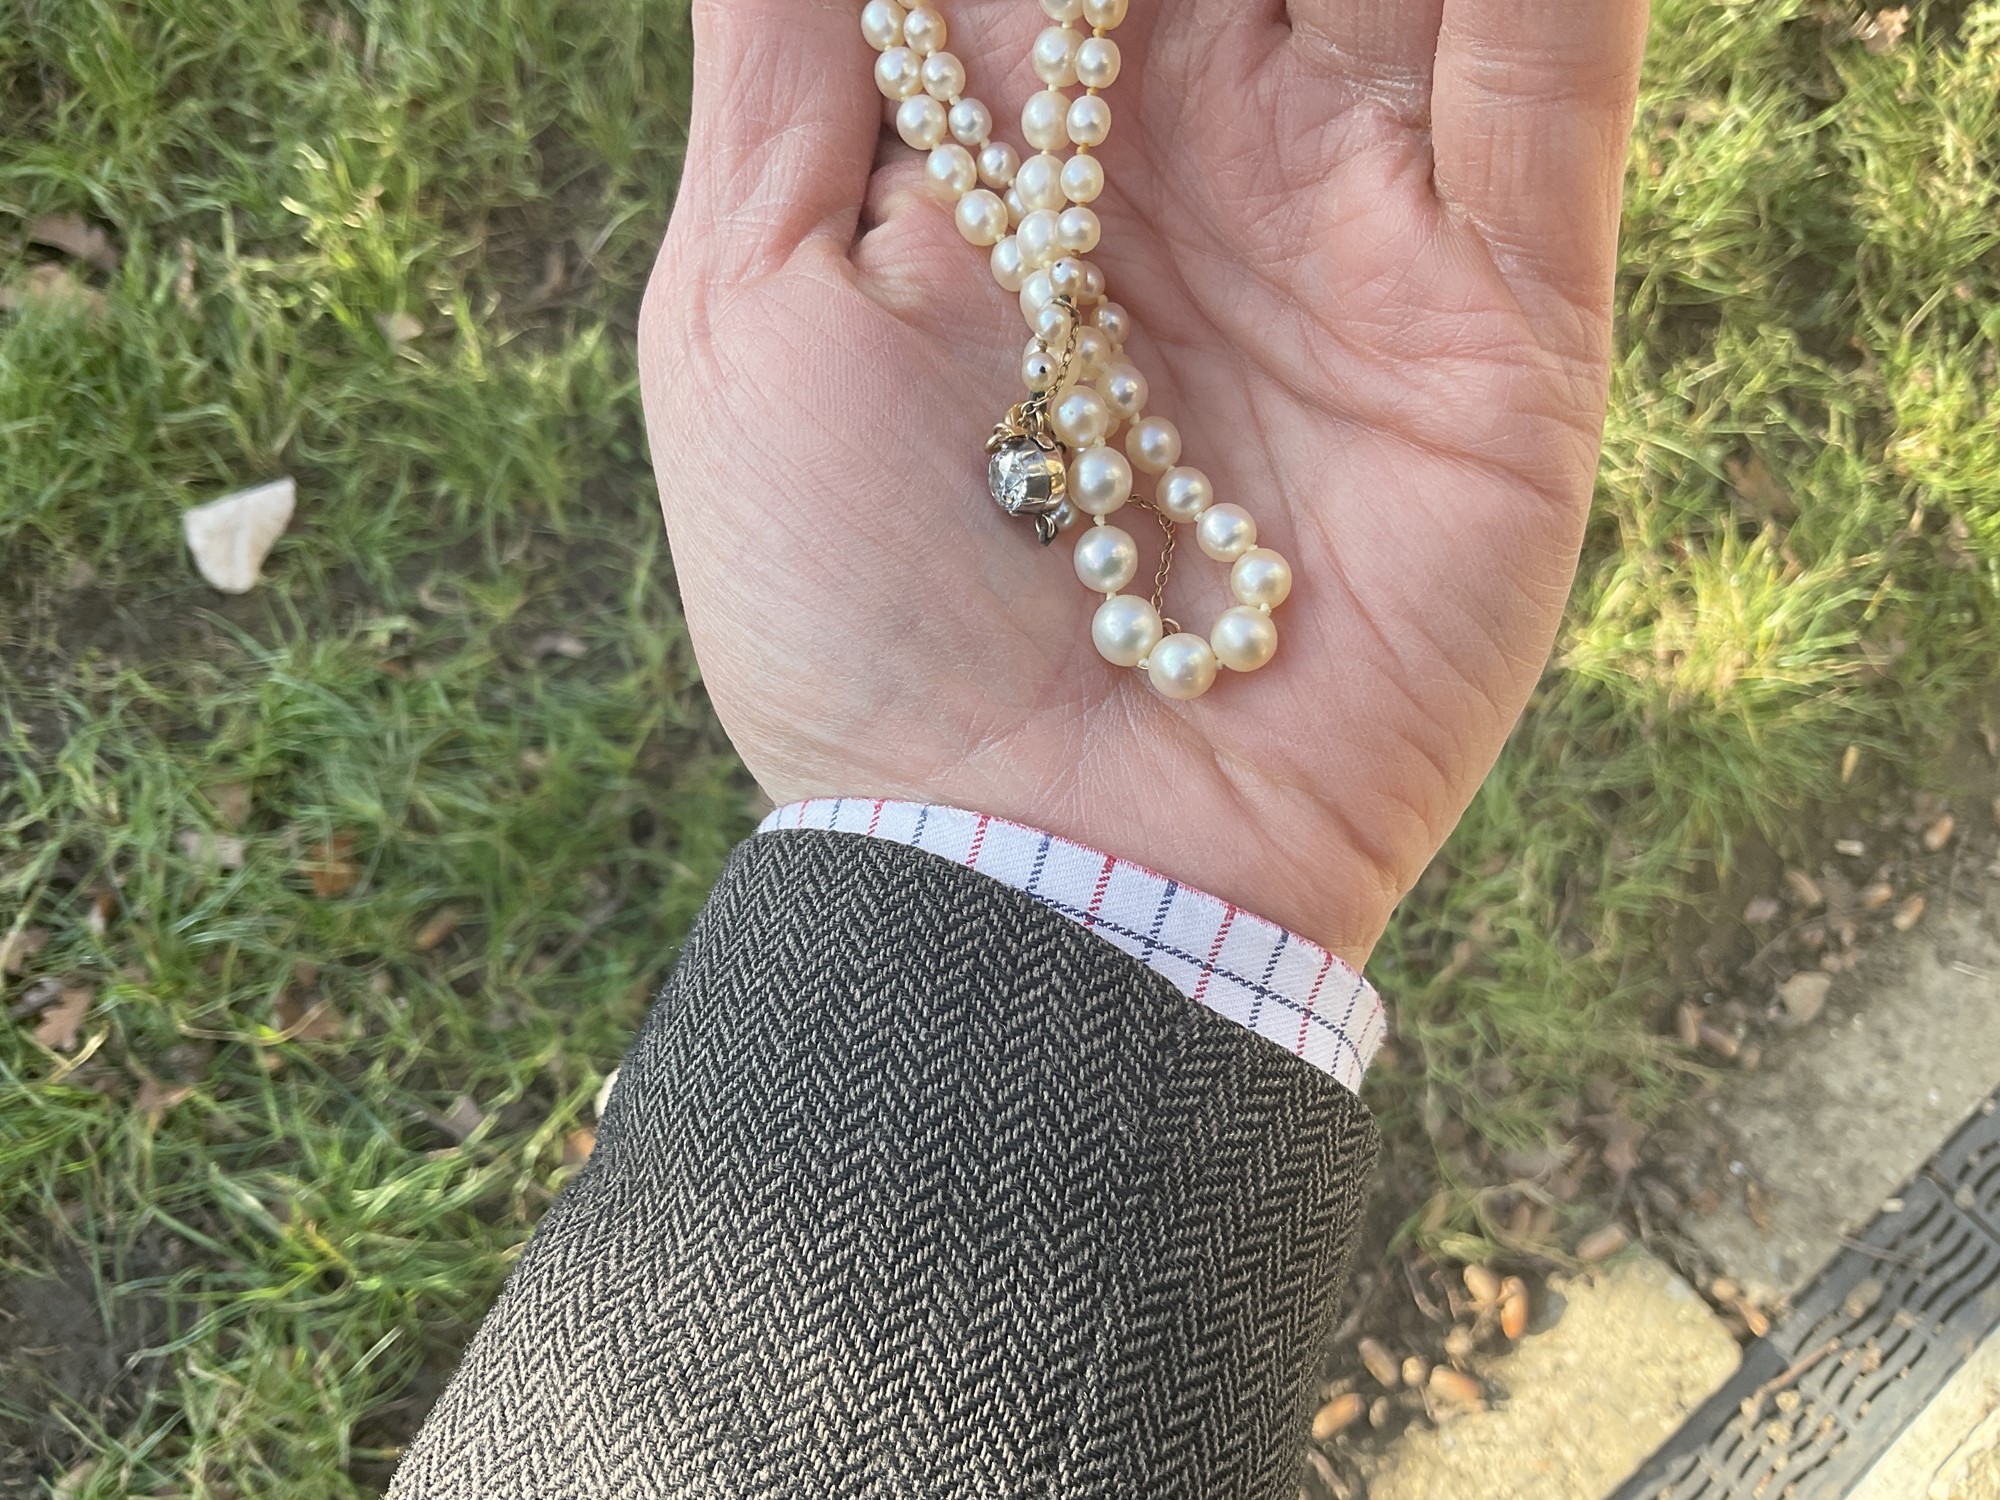 Mikimoto Pearl Necklace with Yellow Gold Clasp